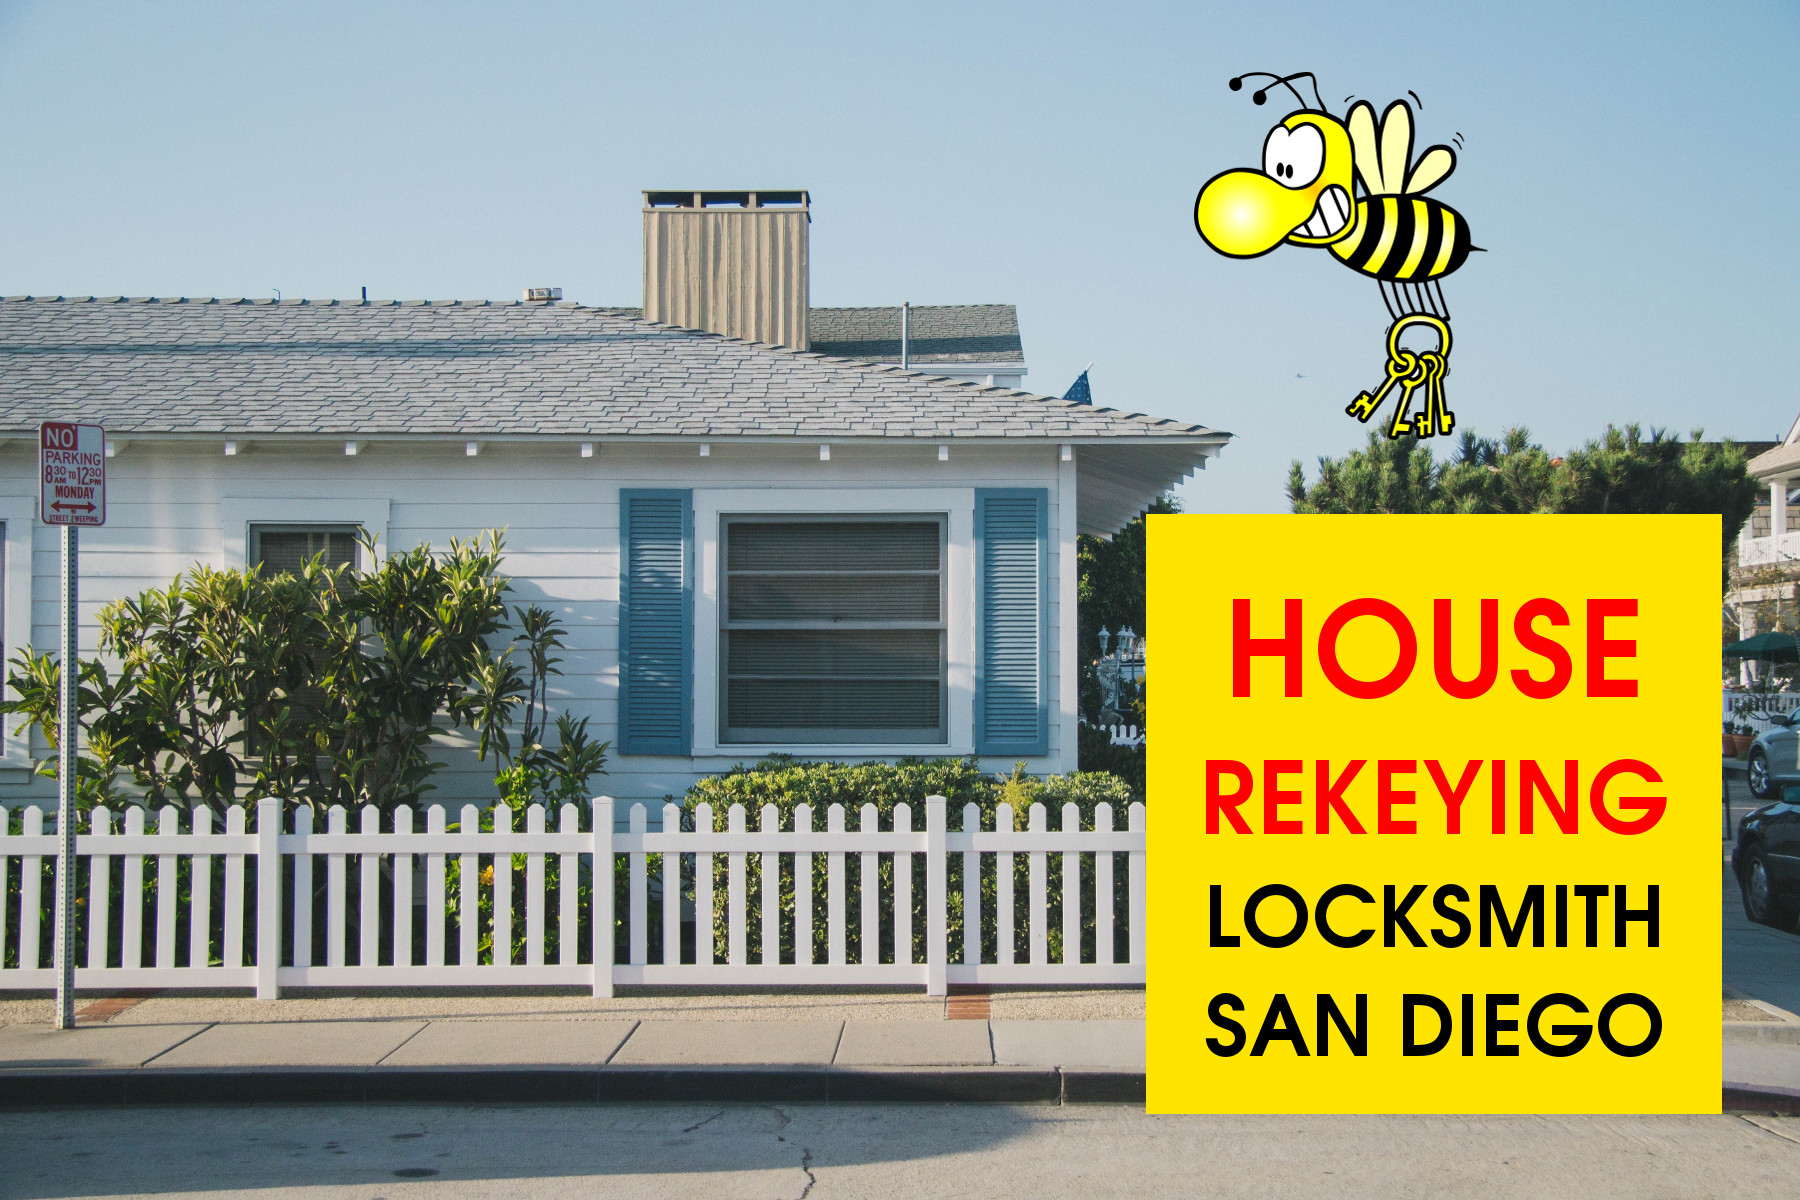 House Rekeying: Why & When Should You Get Your Home Rekeyed?